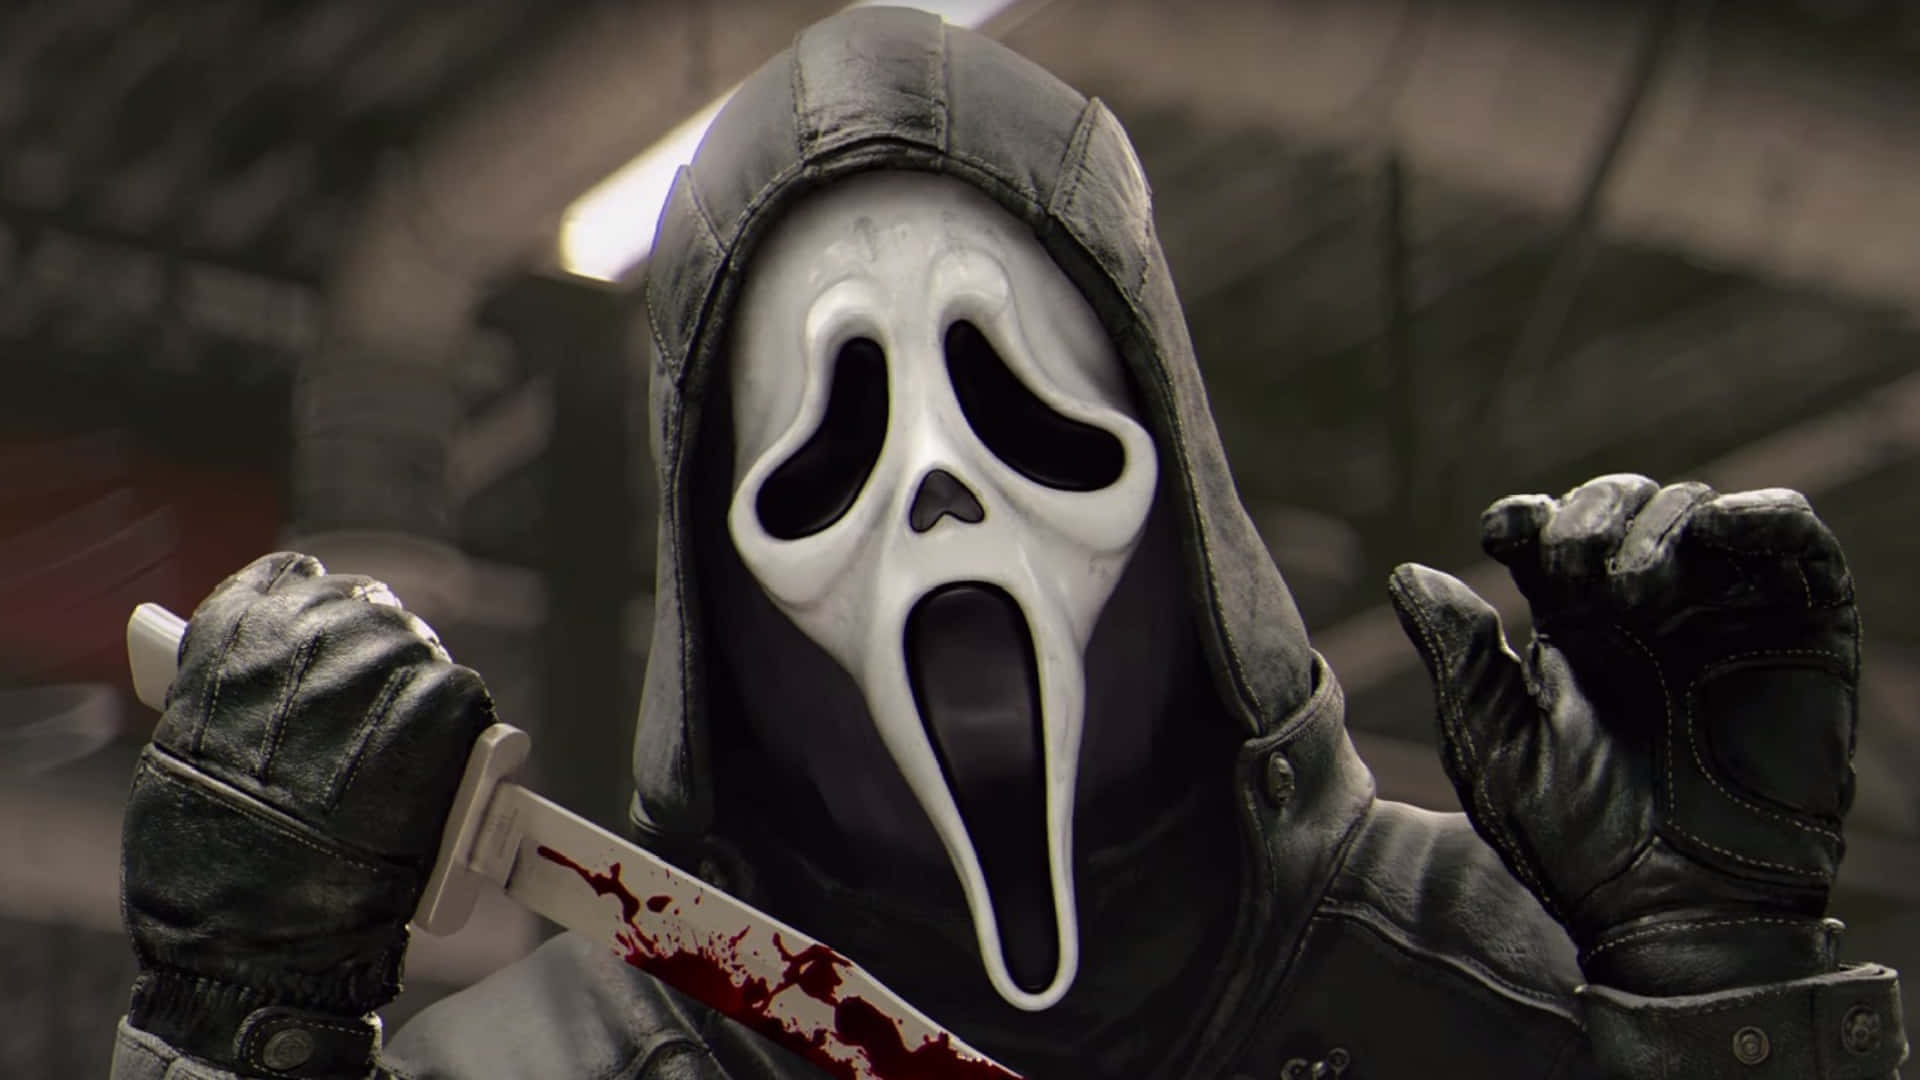 Dirty Knife Ghost Face Pfp Wallpaper